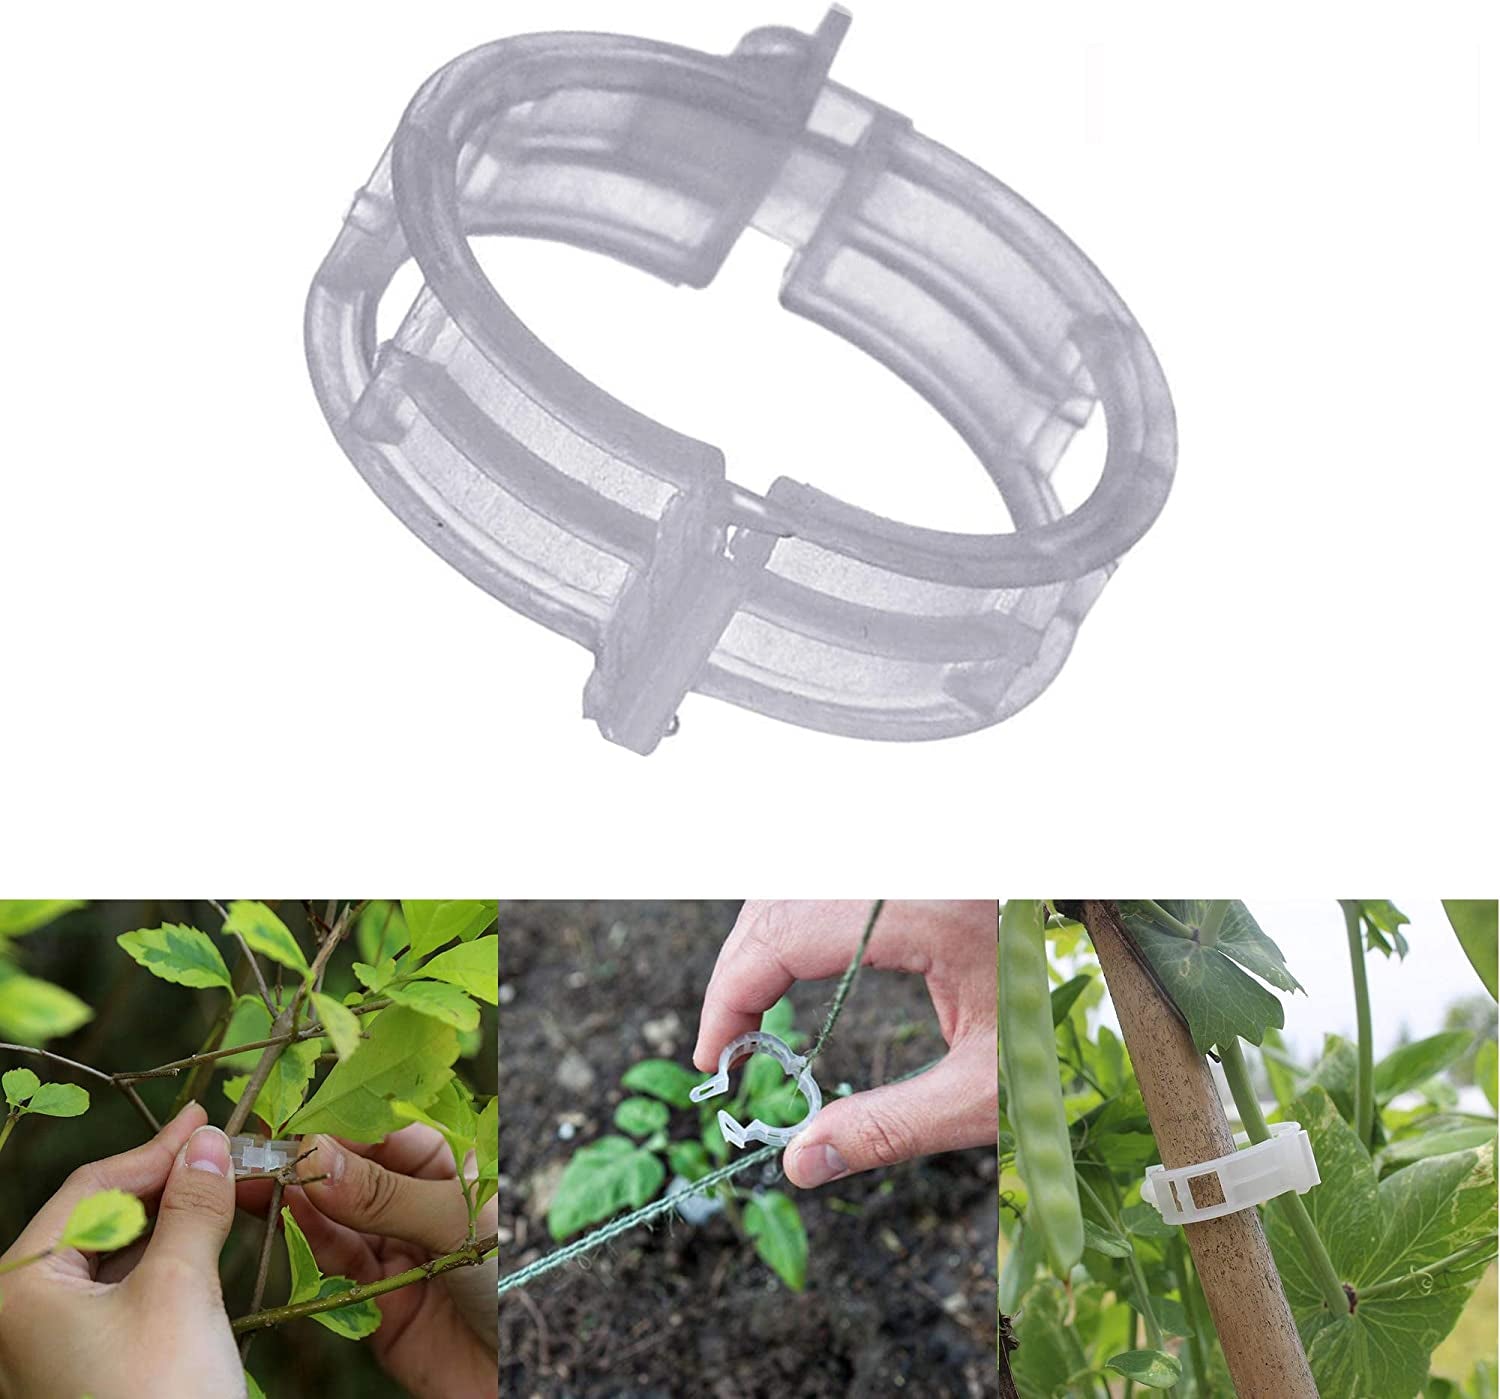 MGTECH, MGTECH 300 Pcs Tomato Trellis Clips, Garden Vegetable Vine Clips, Plant Support Quick Clips for Vine Vegetables to Grow Upright and Healthier